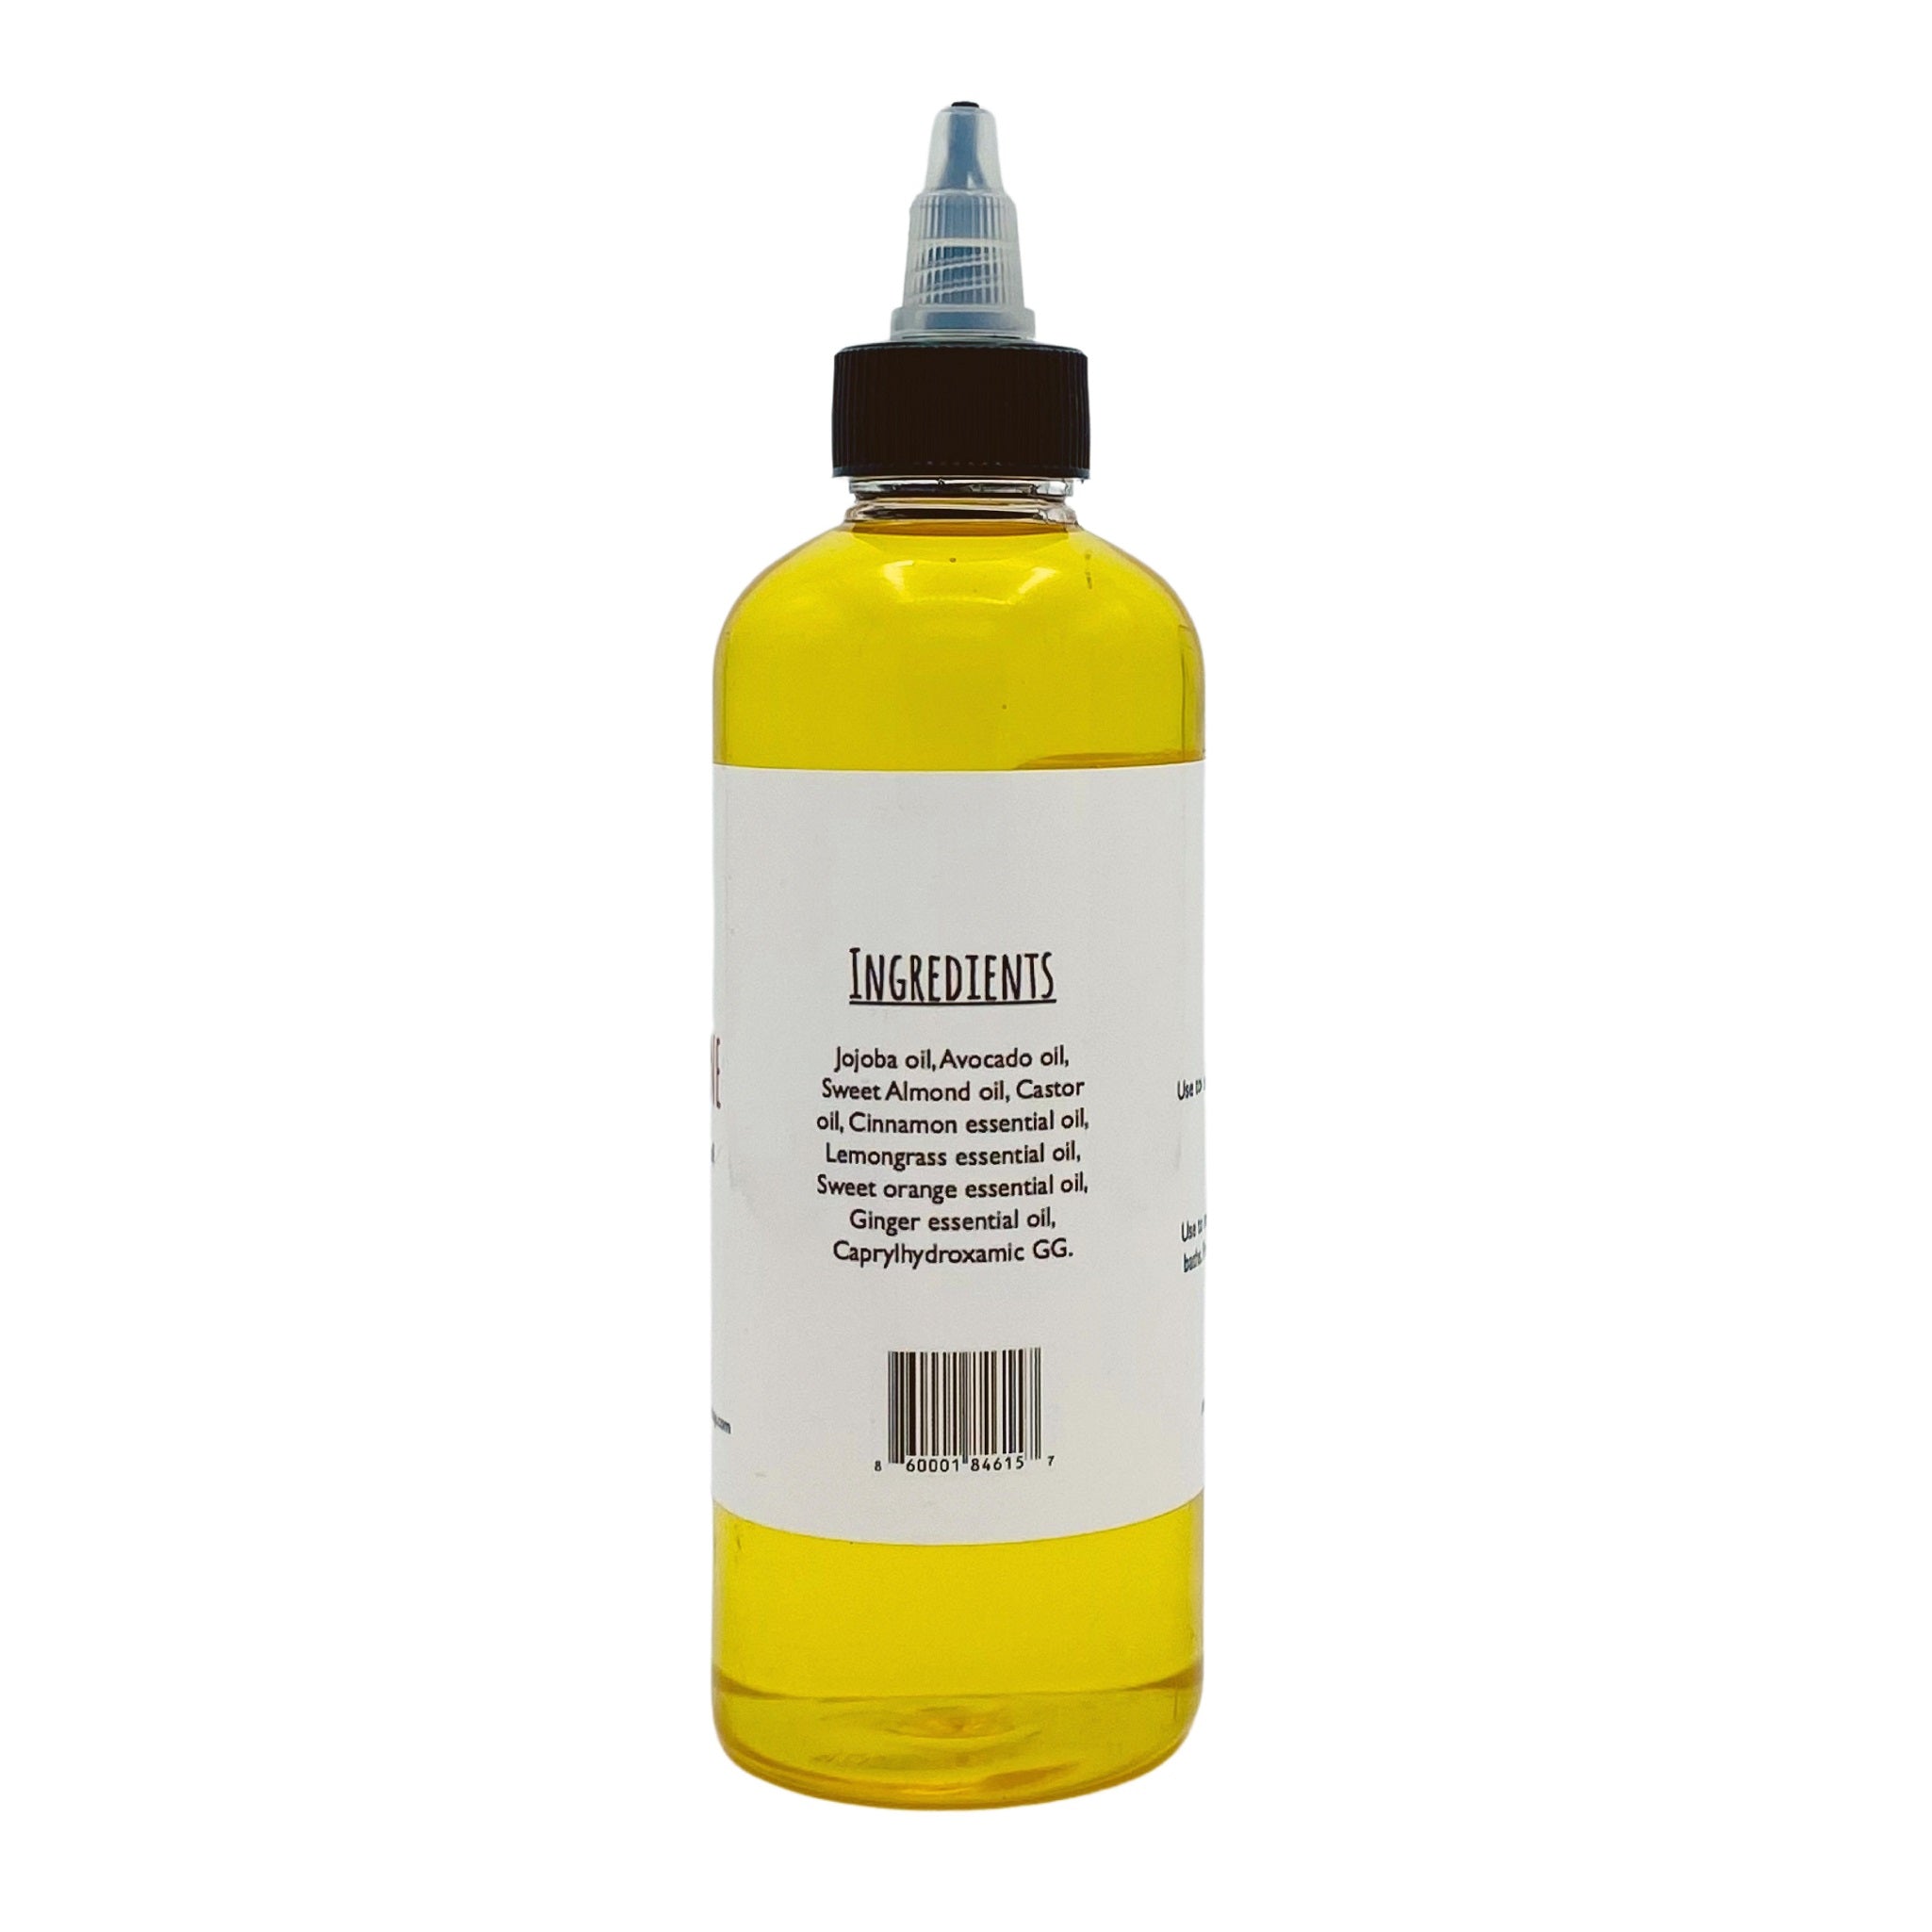  Moonshine Hair and Body Oil